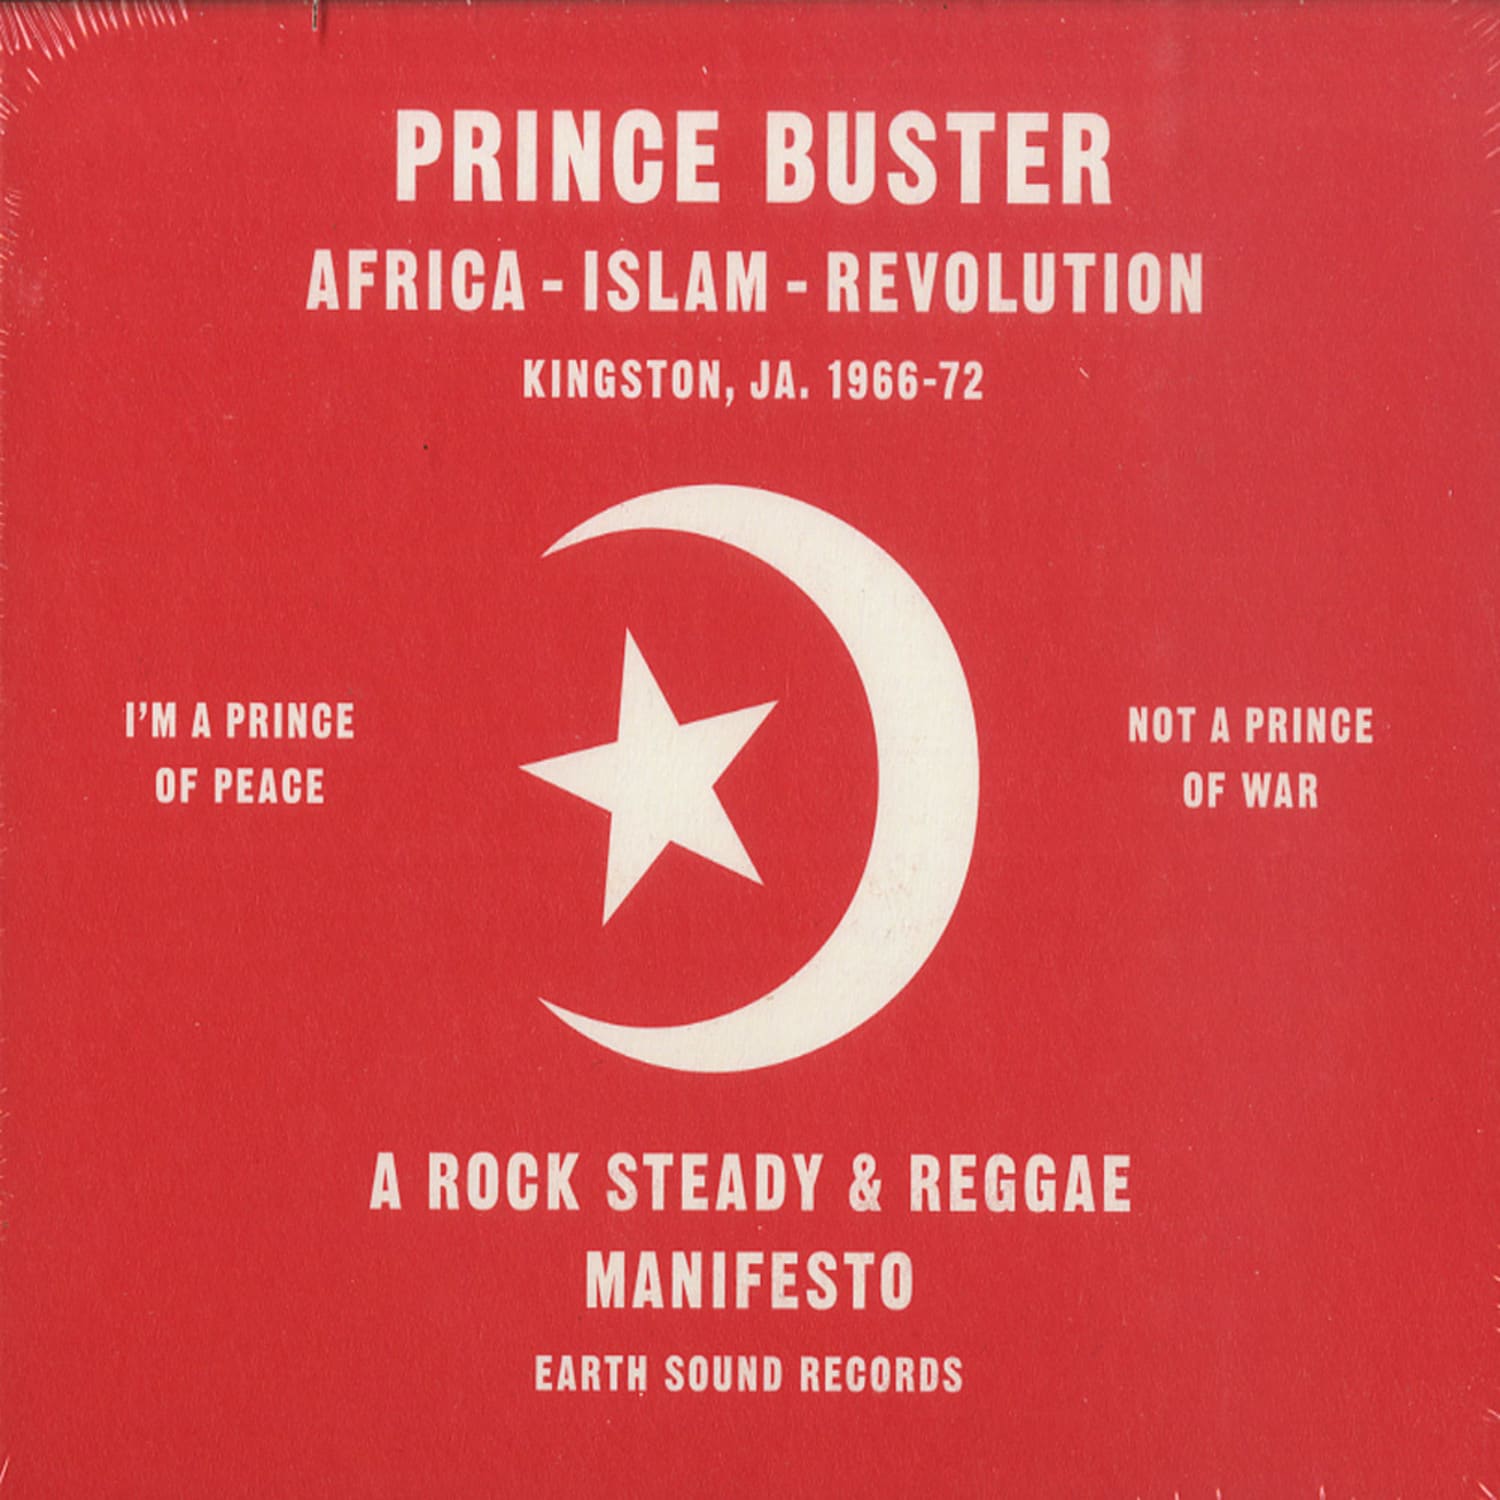 Prince Buster - AFRICA - ISLAM - REVOLUTION 